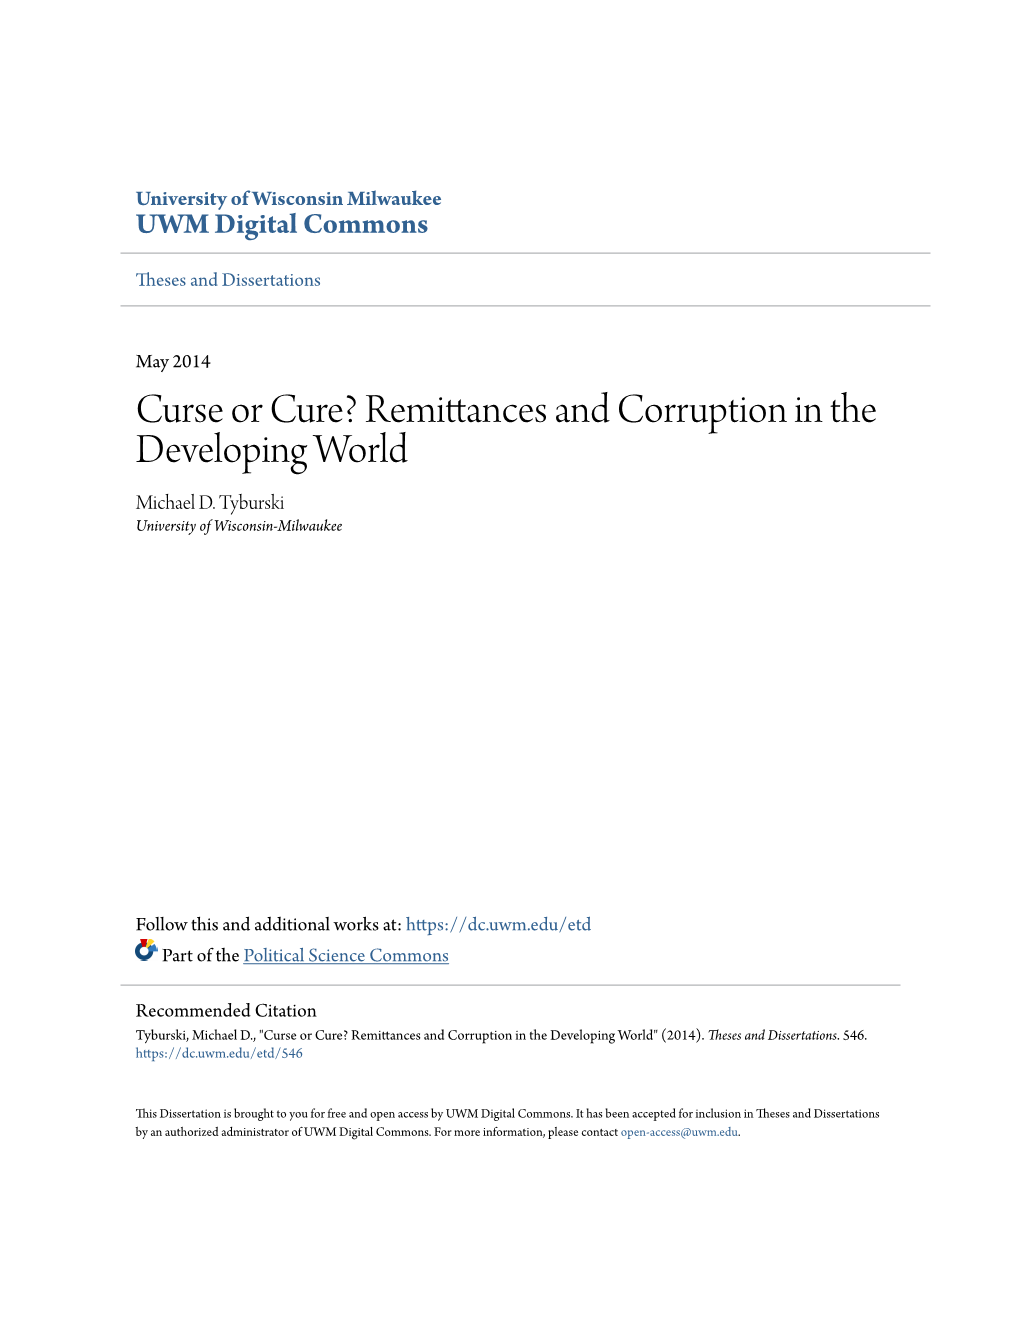 Remittances and Corruption in the Developing World Michael D